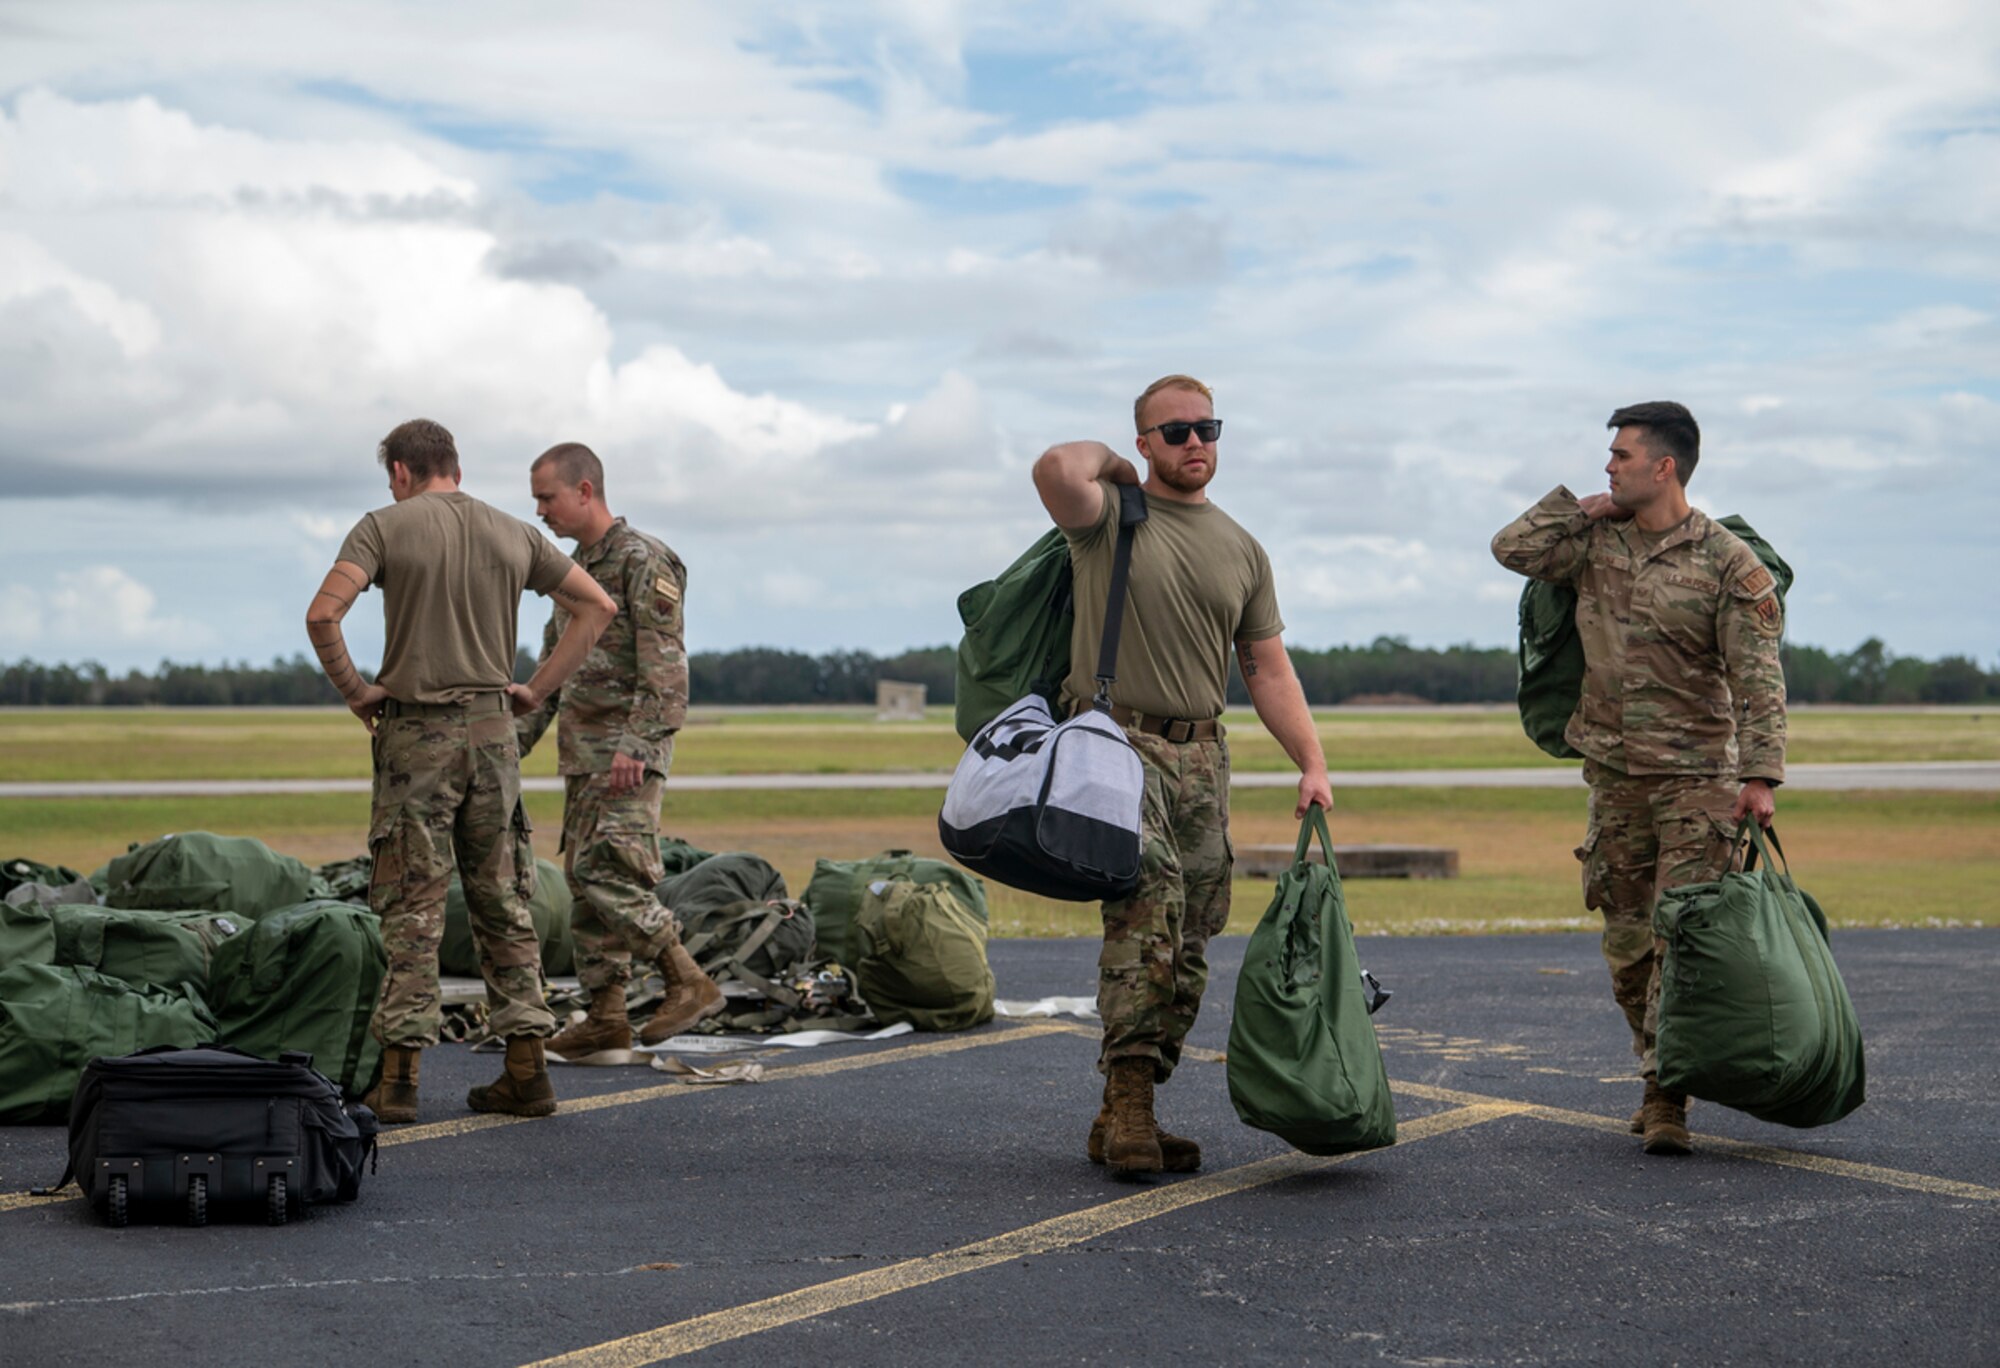 Mosaic Tiger participants unload their bags at Avon Park Air Force Range, Florida, Nov. 13, 2023. A C-17 Globemaster III assigned to the 437th Airlift Wing delivered the troops and cargo from Moody Air Force Base, Georgia. (U.S. Air Force photo by Airman 1st Class Leonid Soubbotine)